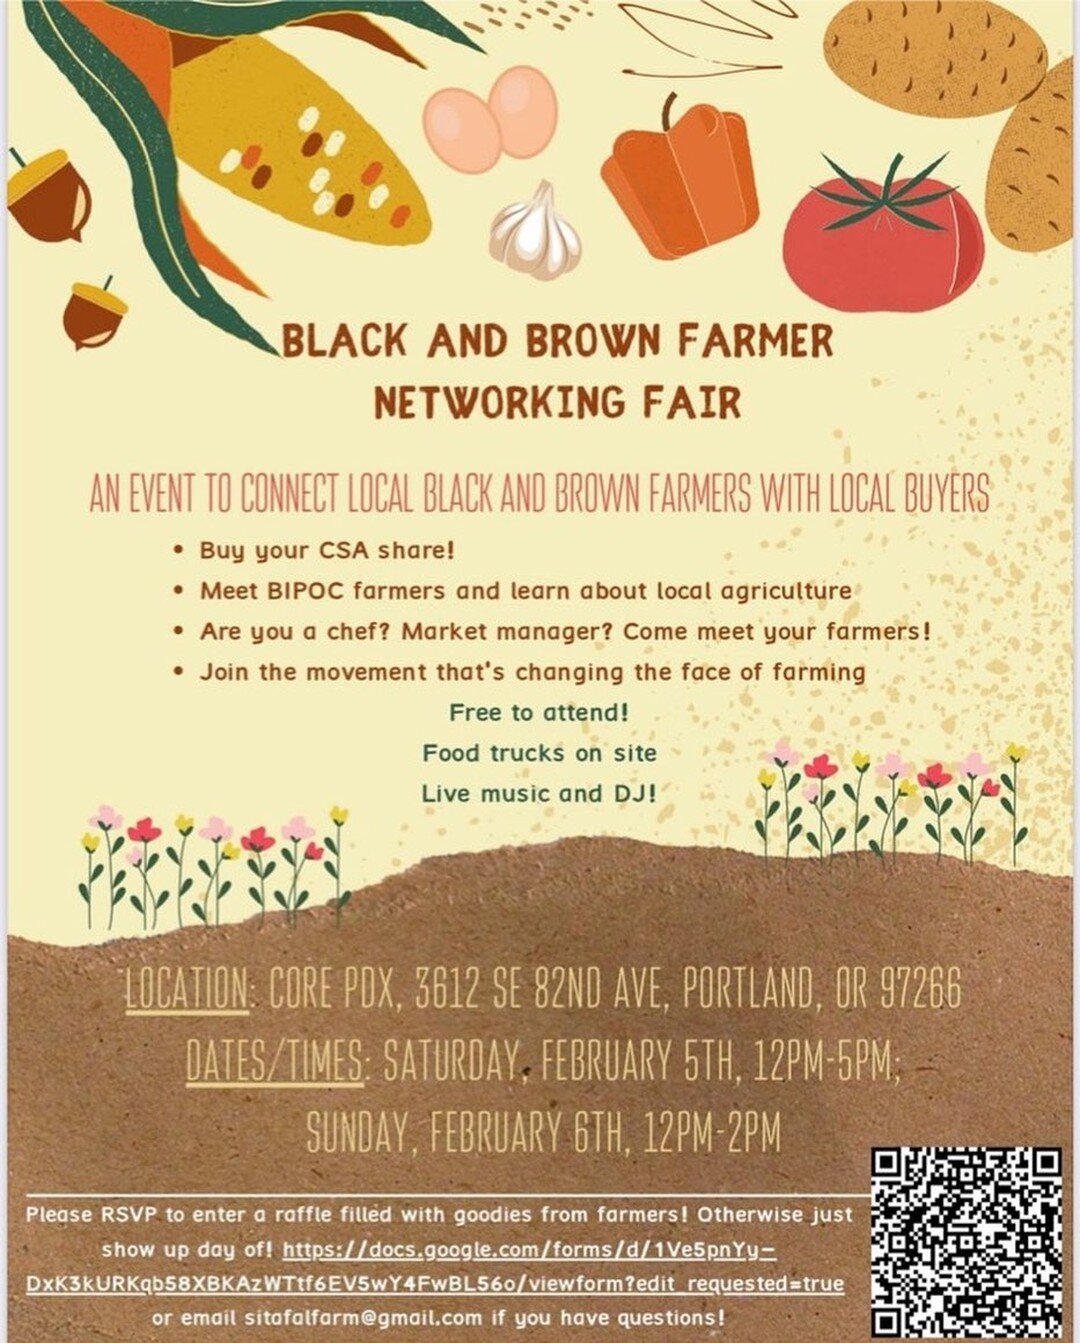 Repost from @tanagerfarm
&bull;
Save the date! Find your farmer!
We will have a booth here selling CSA shares plus many other incredible black and brown farmers will be here to connect with local buyers. Come on out, February 5th &amp; 6th @corepdx